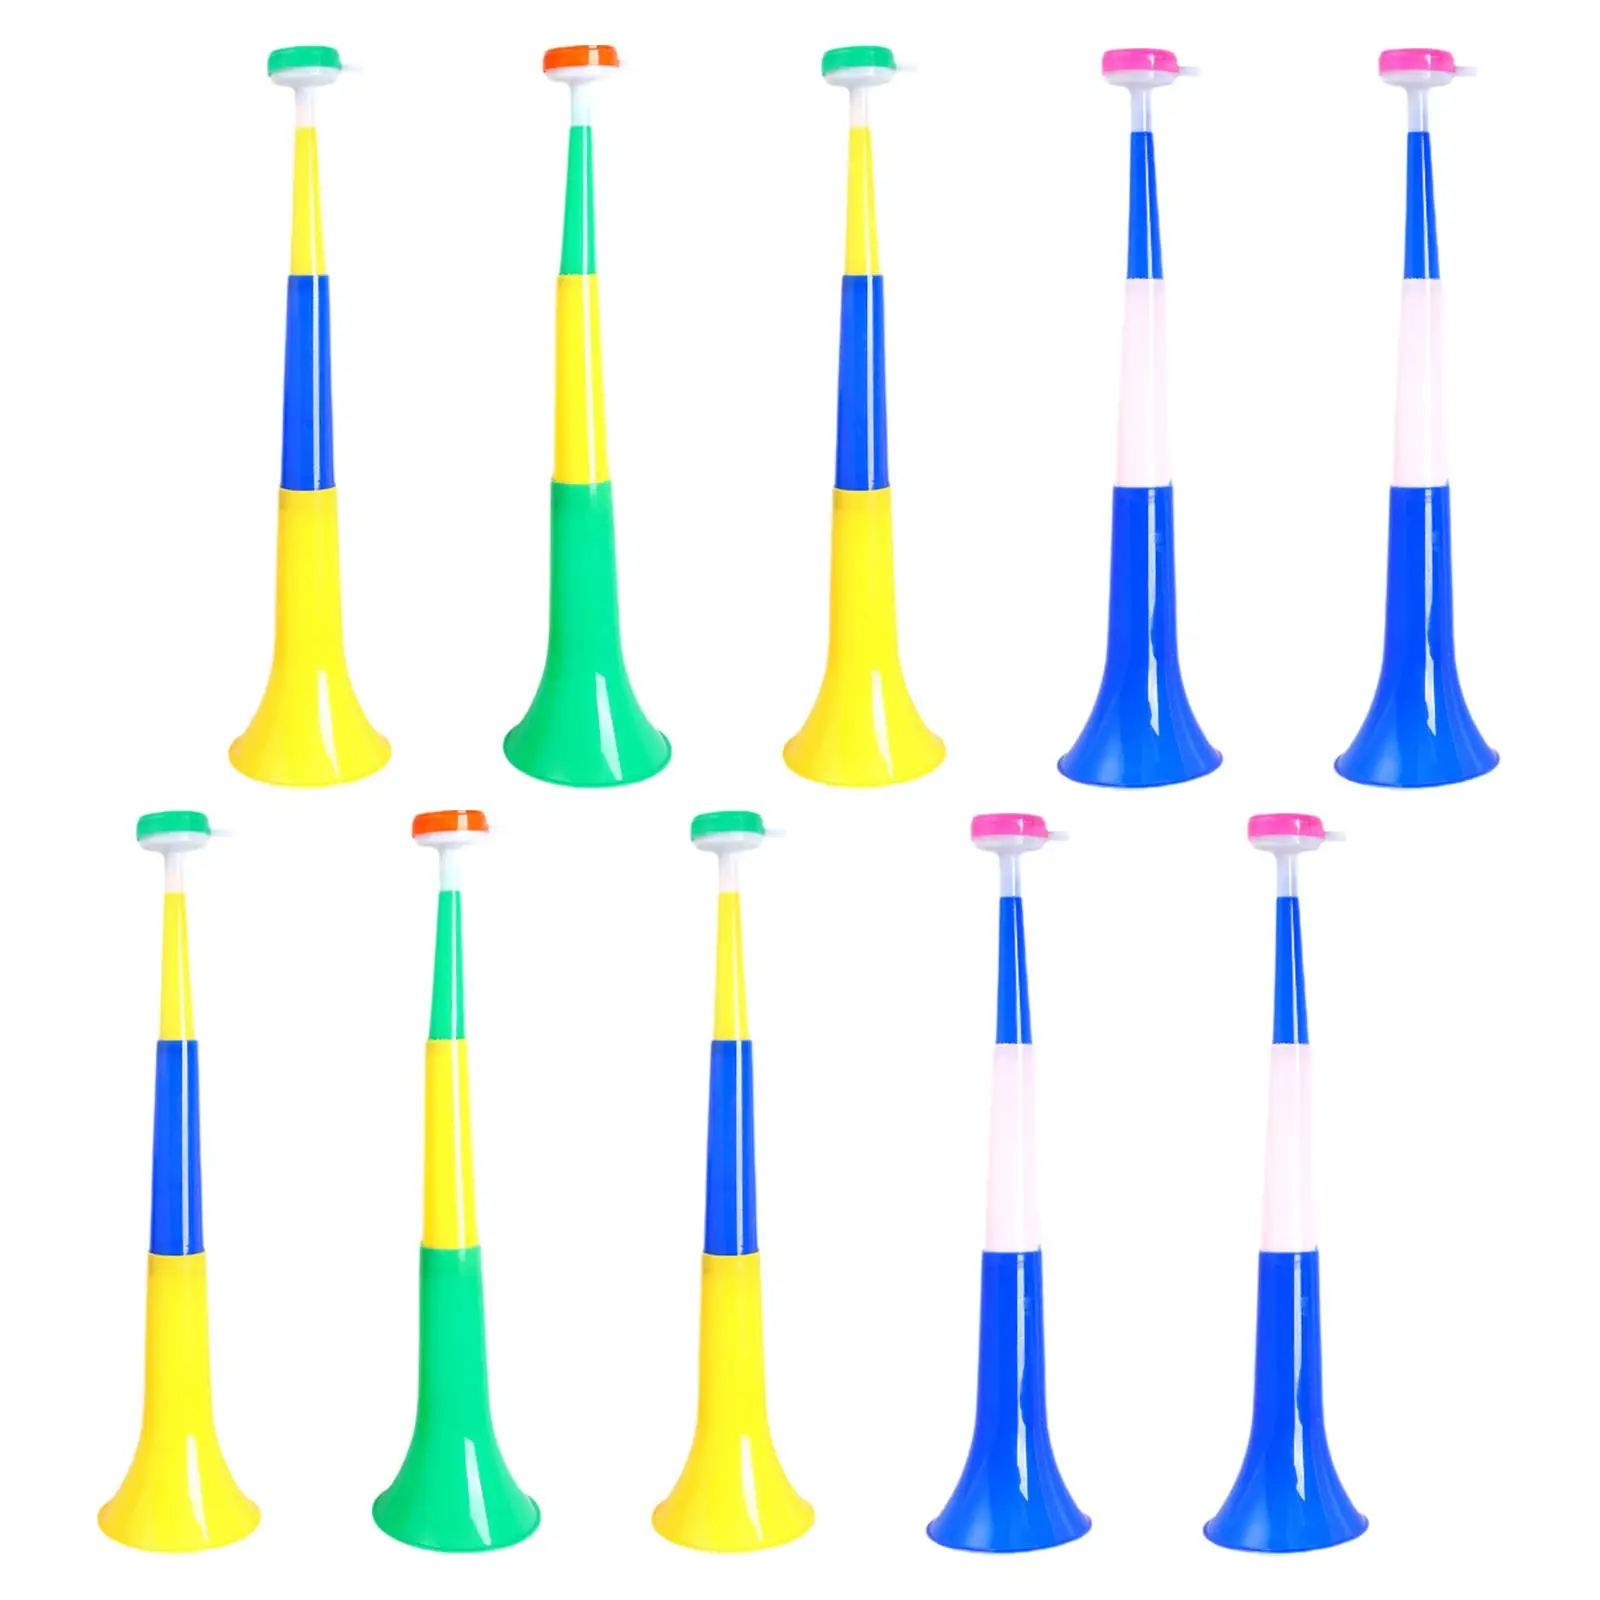 10x Stadium Horns Atmosphere Props for Games Sporting Events Favors Accessories Adults Kids